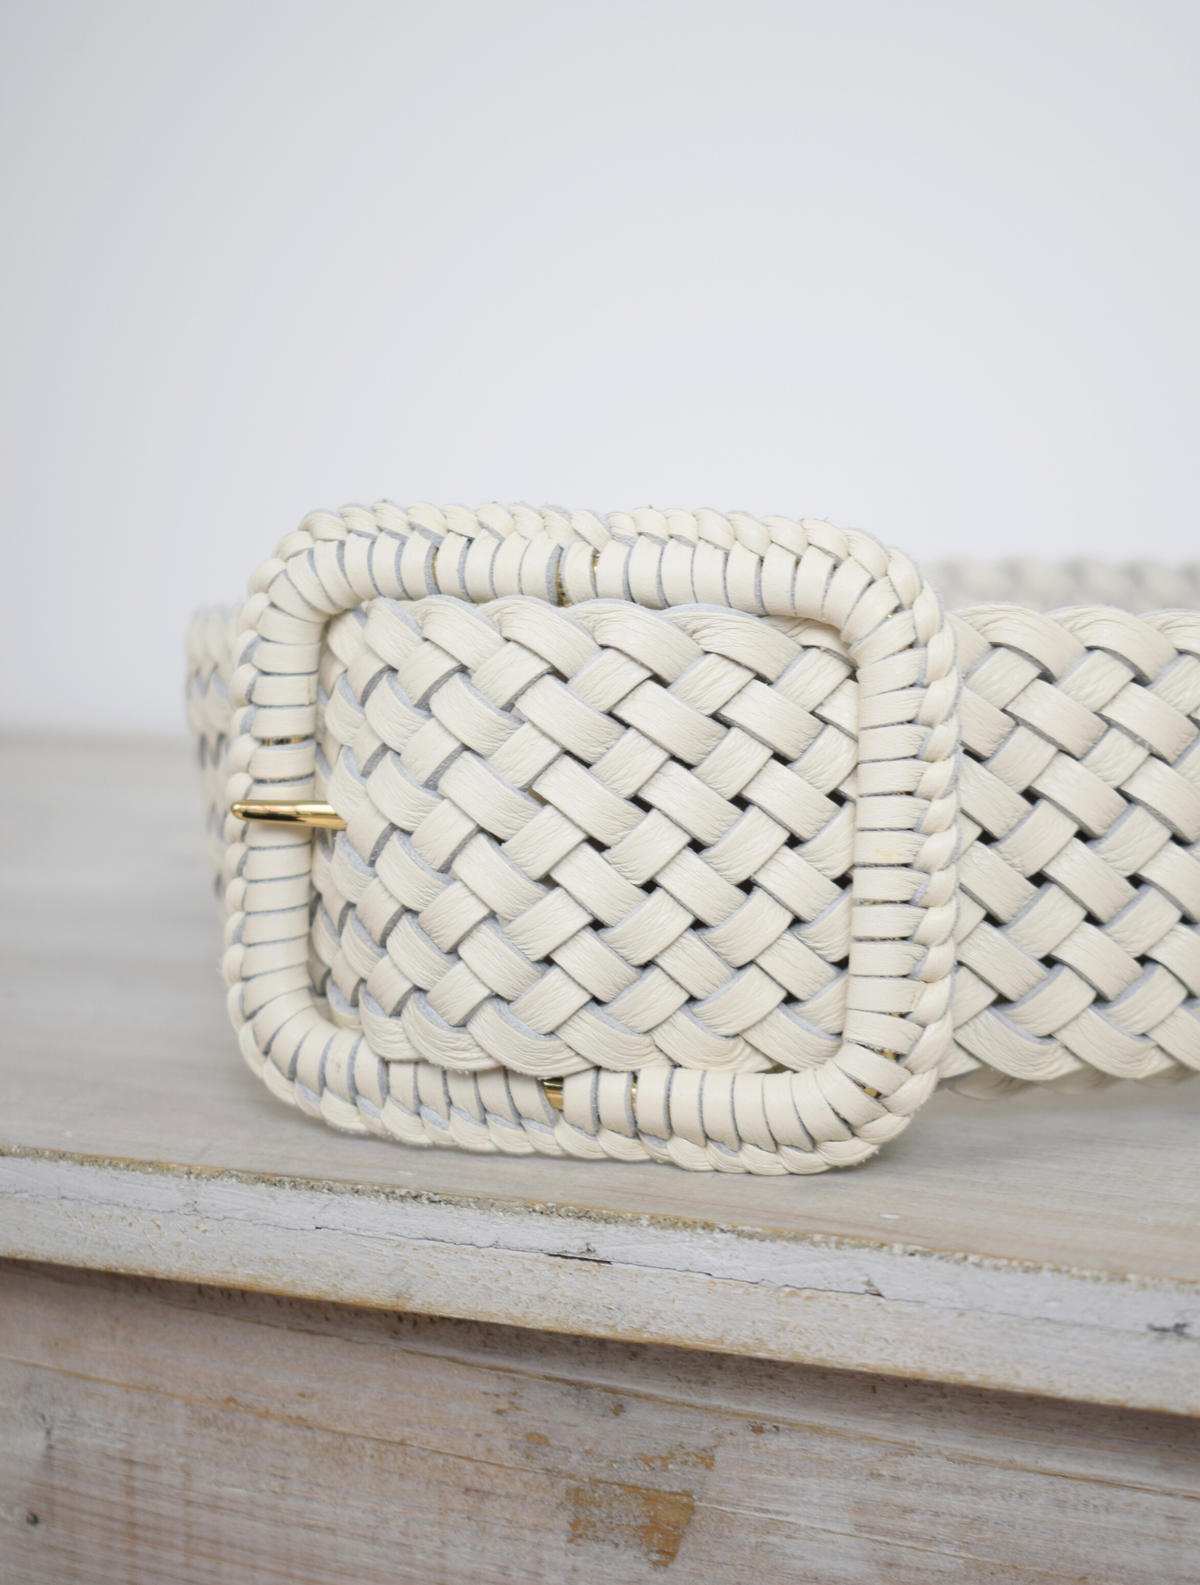 Wide plaited ivory leather belt with oblong leather bound buckle